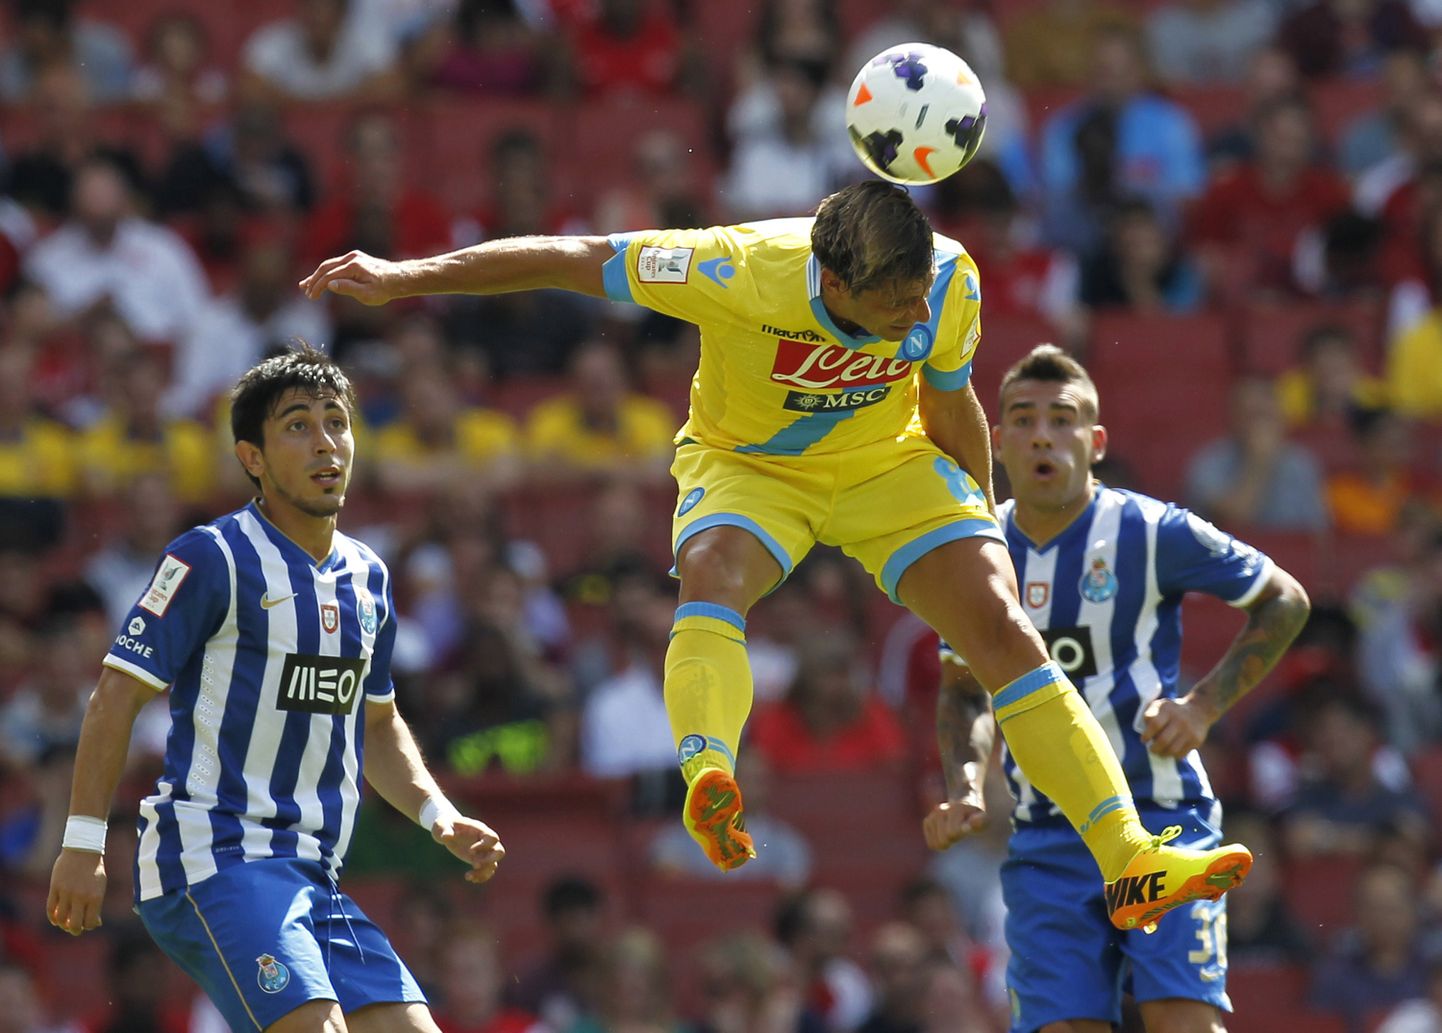 Napoli's Italian striker Emanuele Calaio heads the ball during the pre-season friendly football match between Napoli and FC Porto at The Emirates Stadium in north London on August 4, 2013, the game is one of four matches played over two days for the Emirates Cup. AFP PHOTO/IAN KINGTON